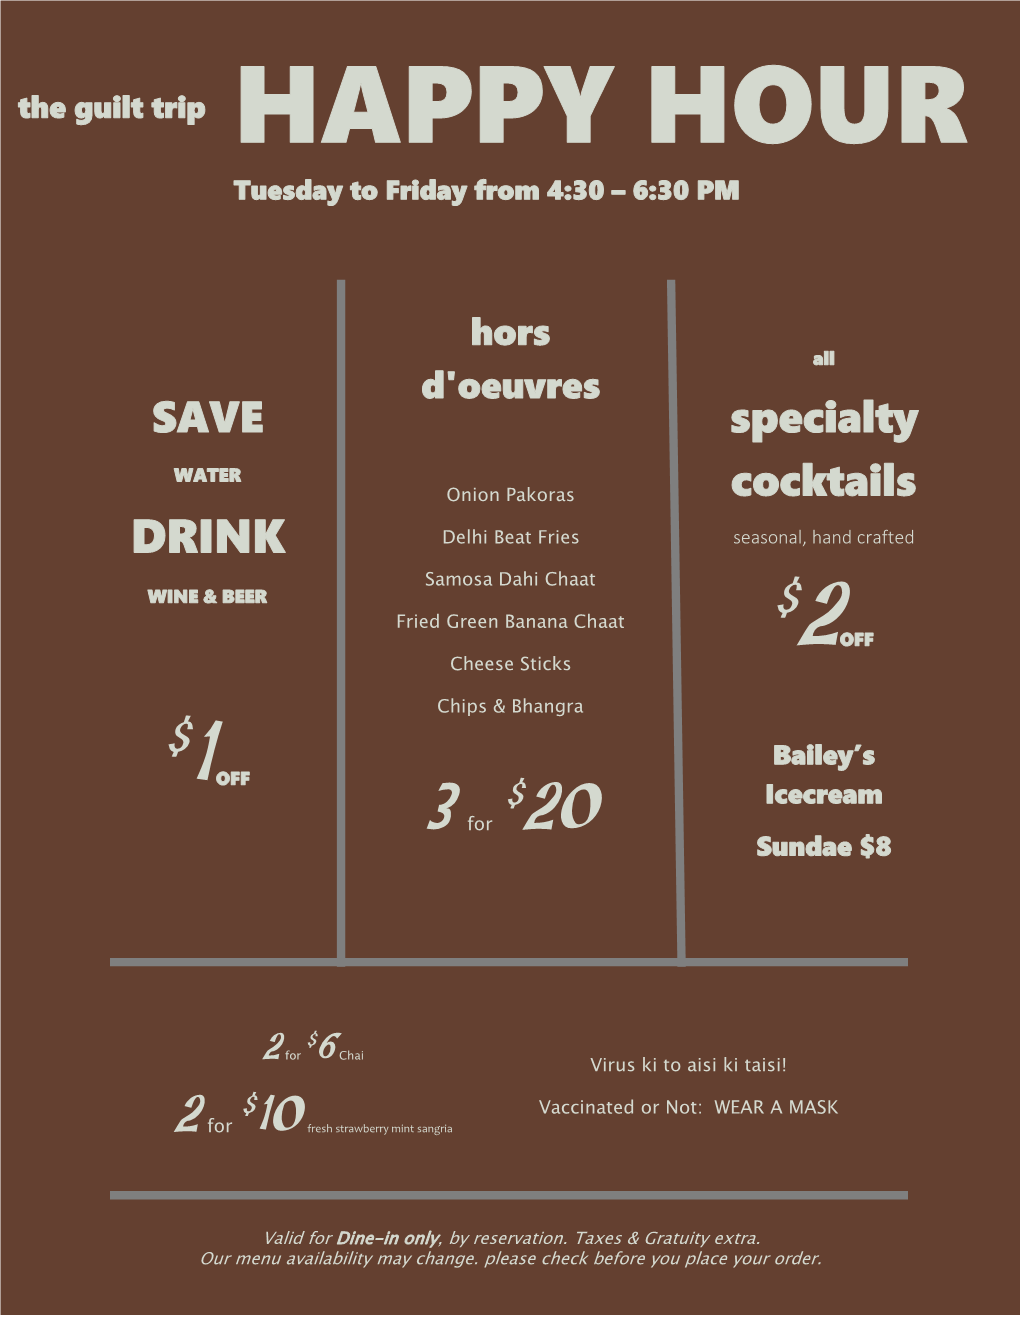 SAVE Specialty Cocktails